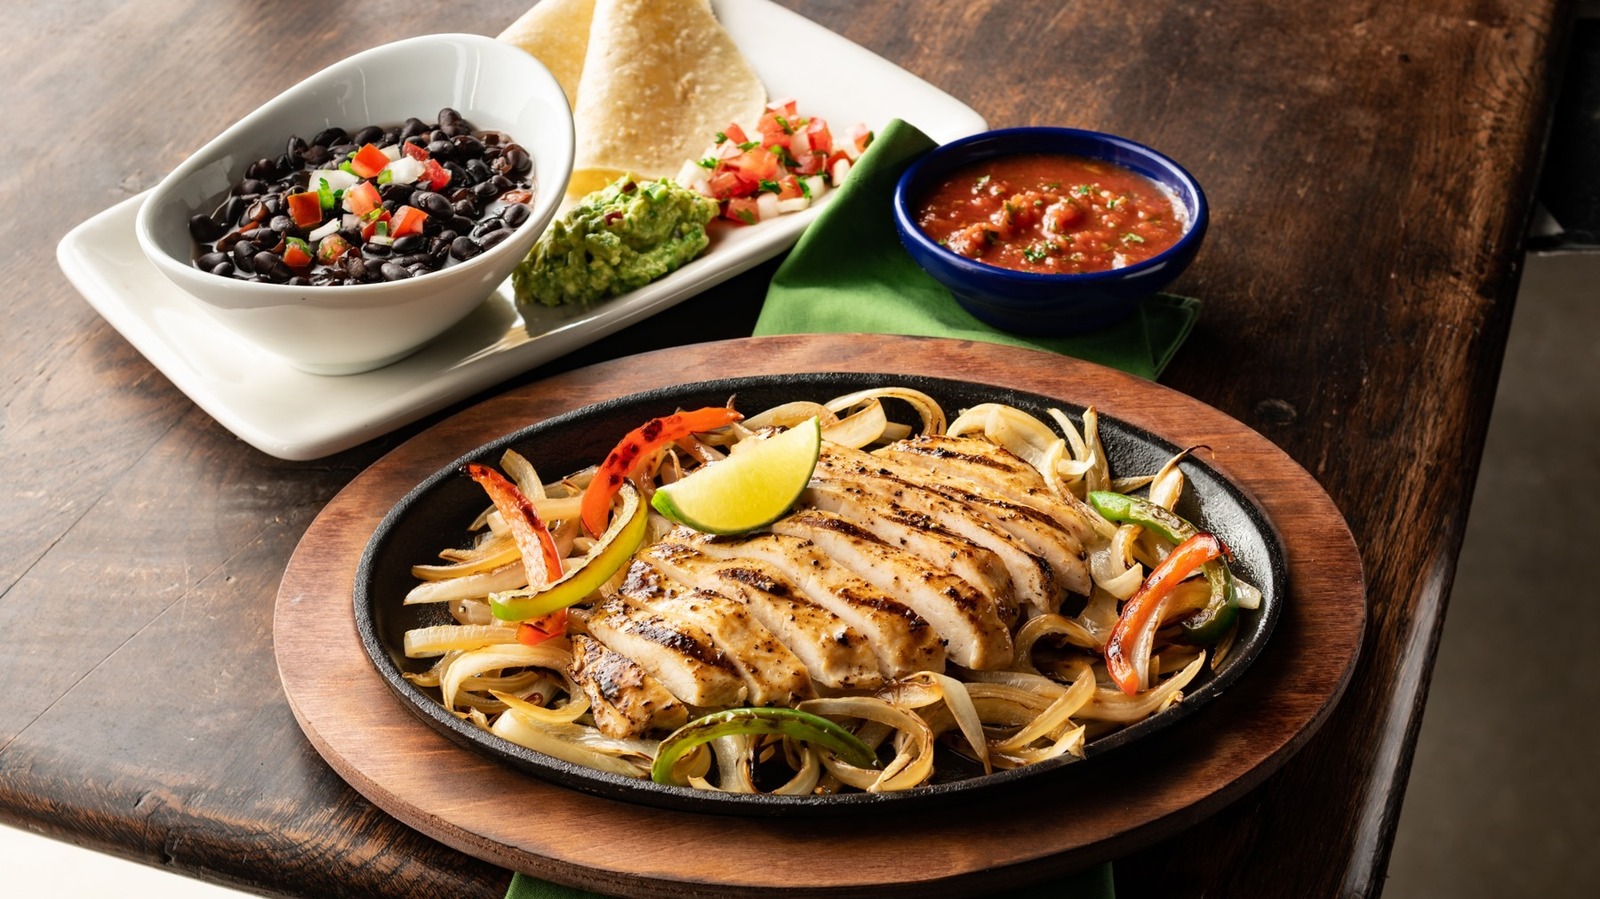 On The Border - Mexican Grill & Cantina - Tex Mex Restaurant